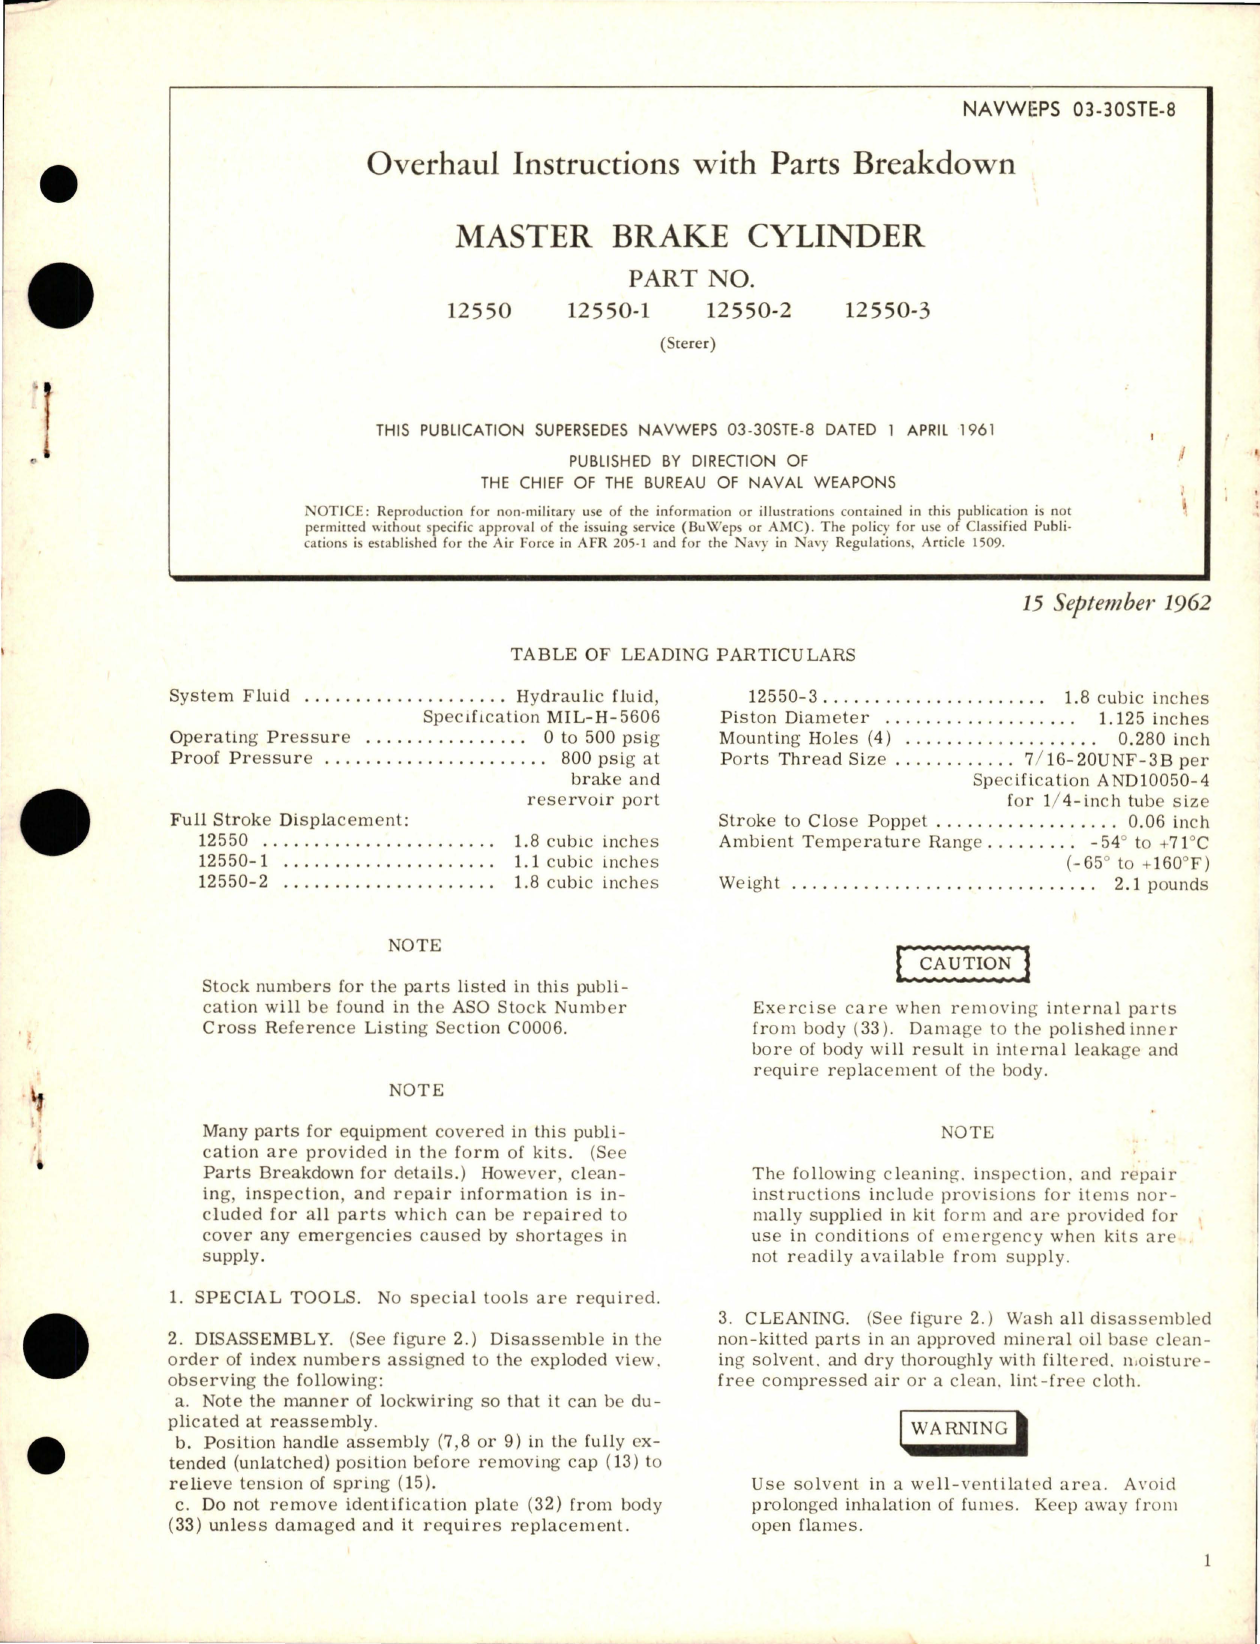 Sample page 1 from AirCorps Library document: Overhaul Instructions with Parts Breakdown for Master Brake Cylinder - Parts 12550, 12550-1, 12550-2, and 12550-3